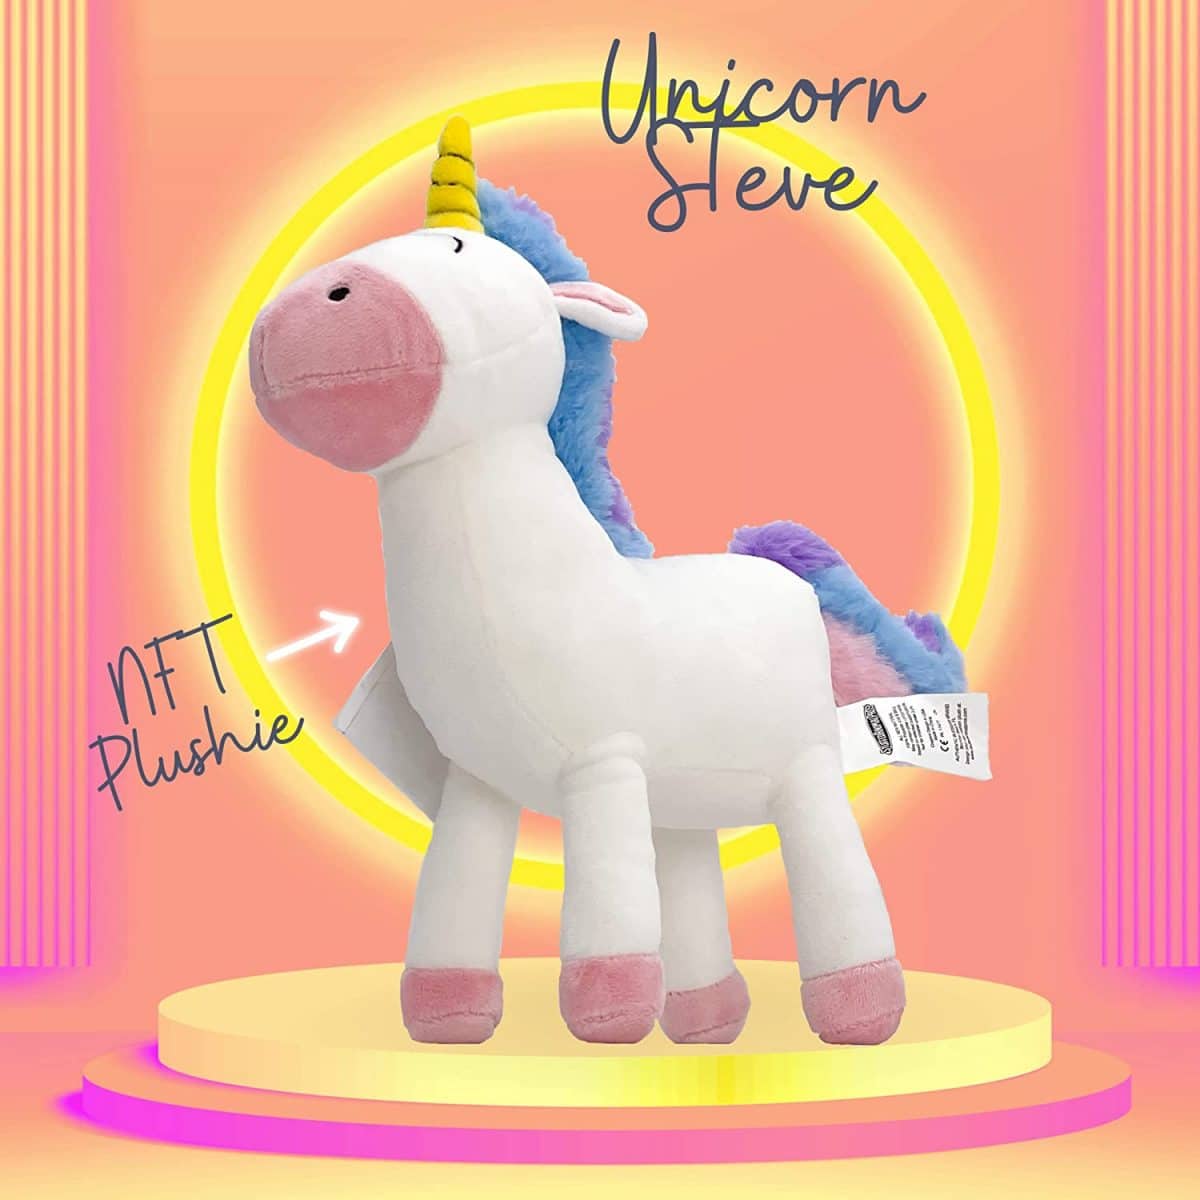 image of a phygital plush unicorn toy by Budsies